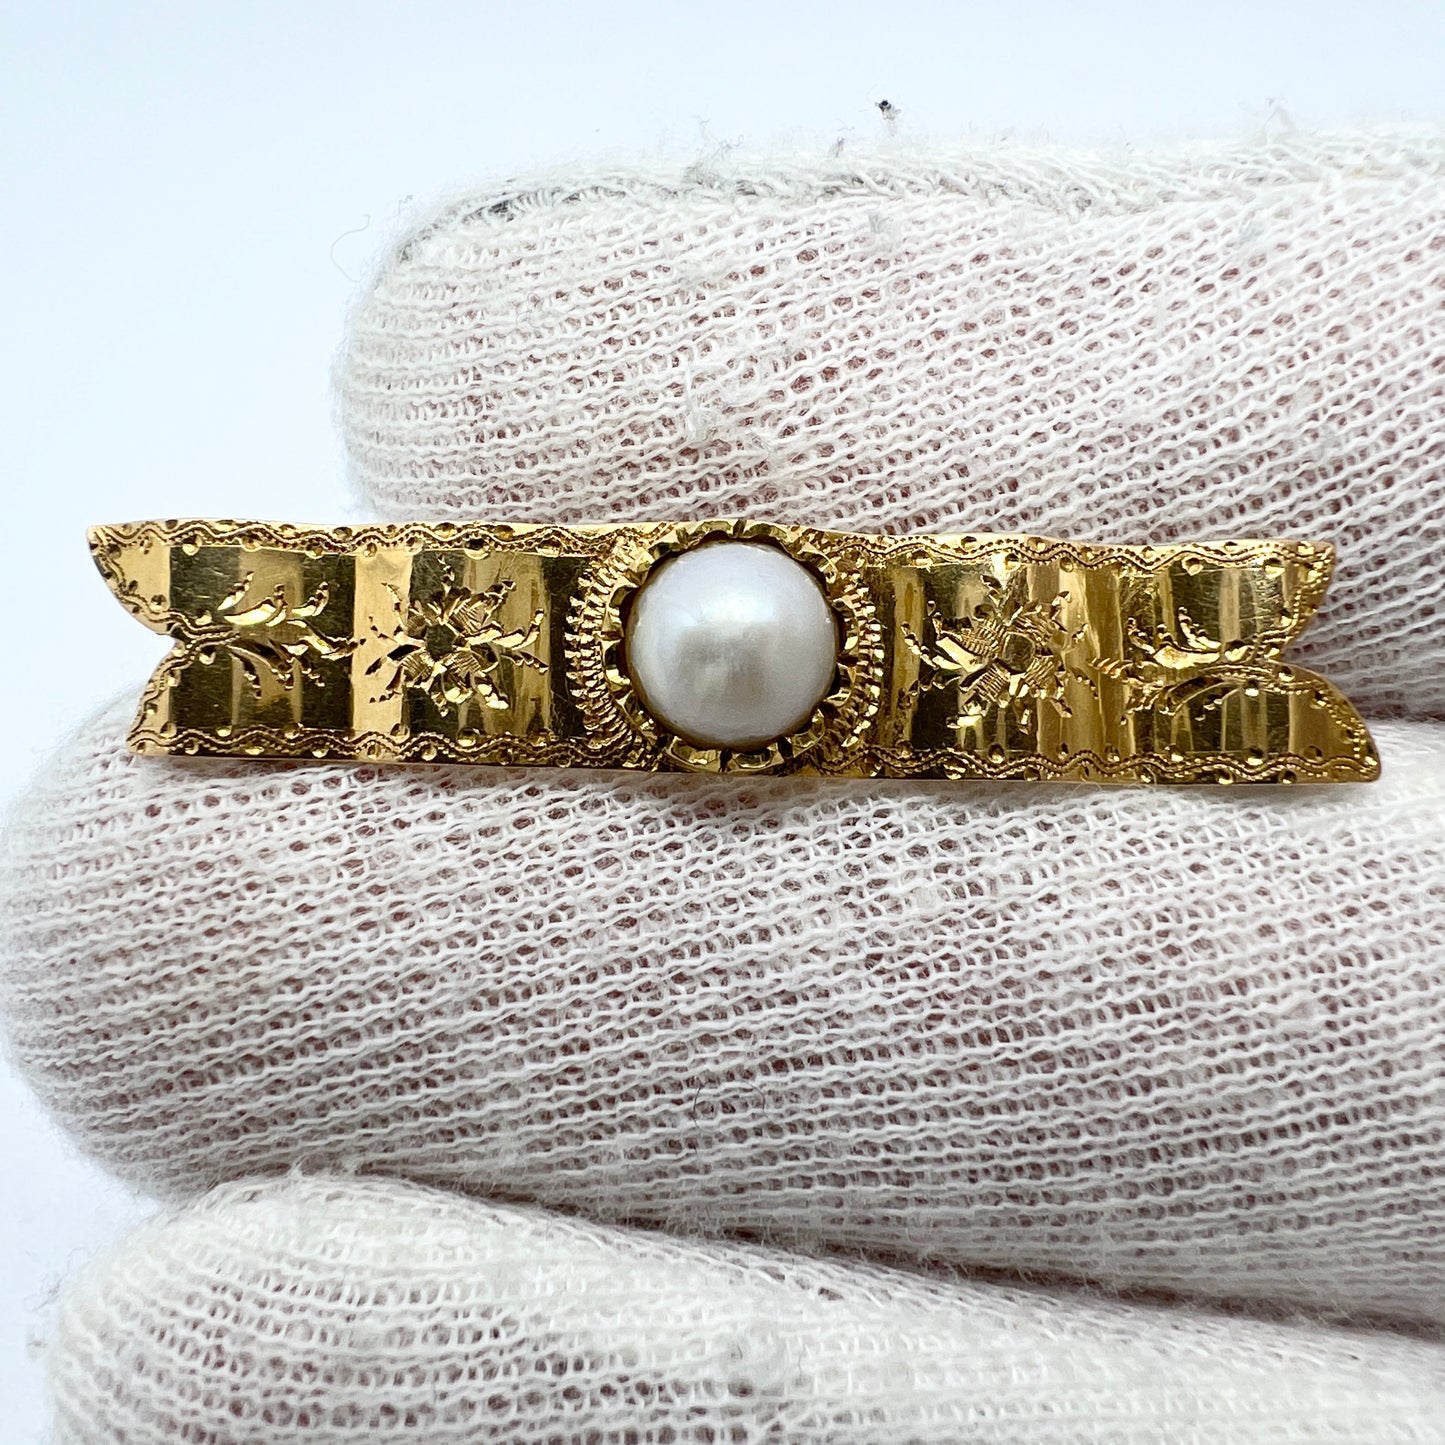 Stockholm 1892, Antique Victorian 18k Gold Pearl Memory Pin Brooch.